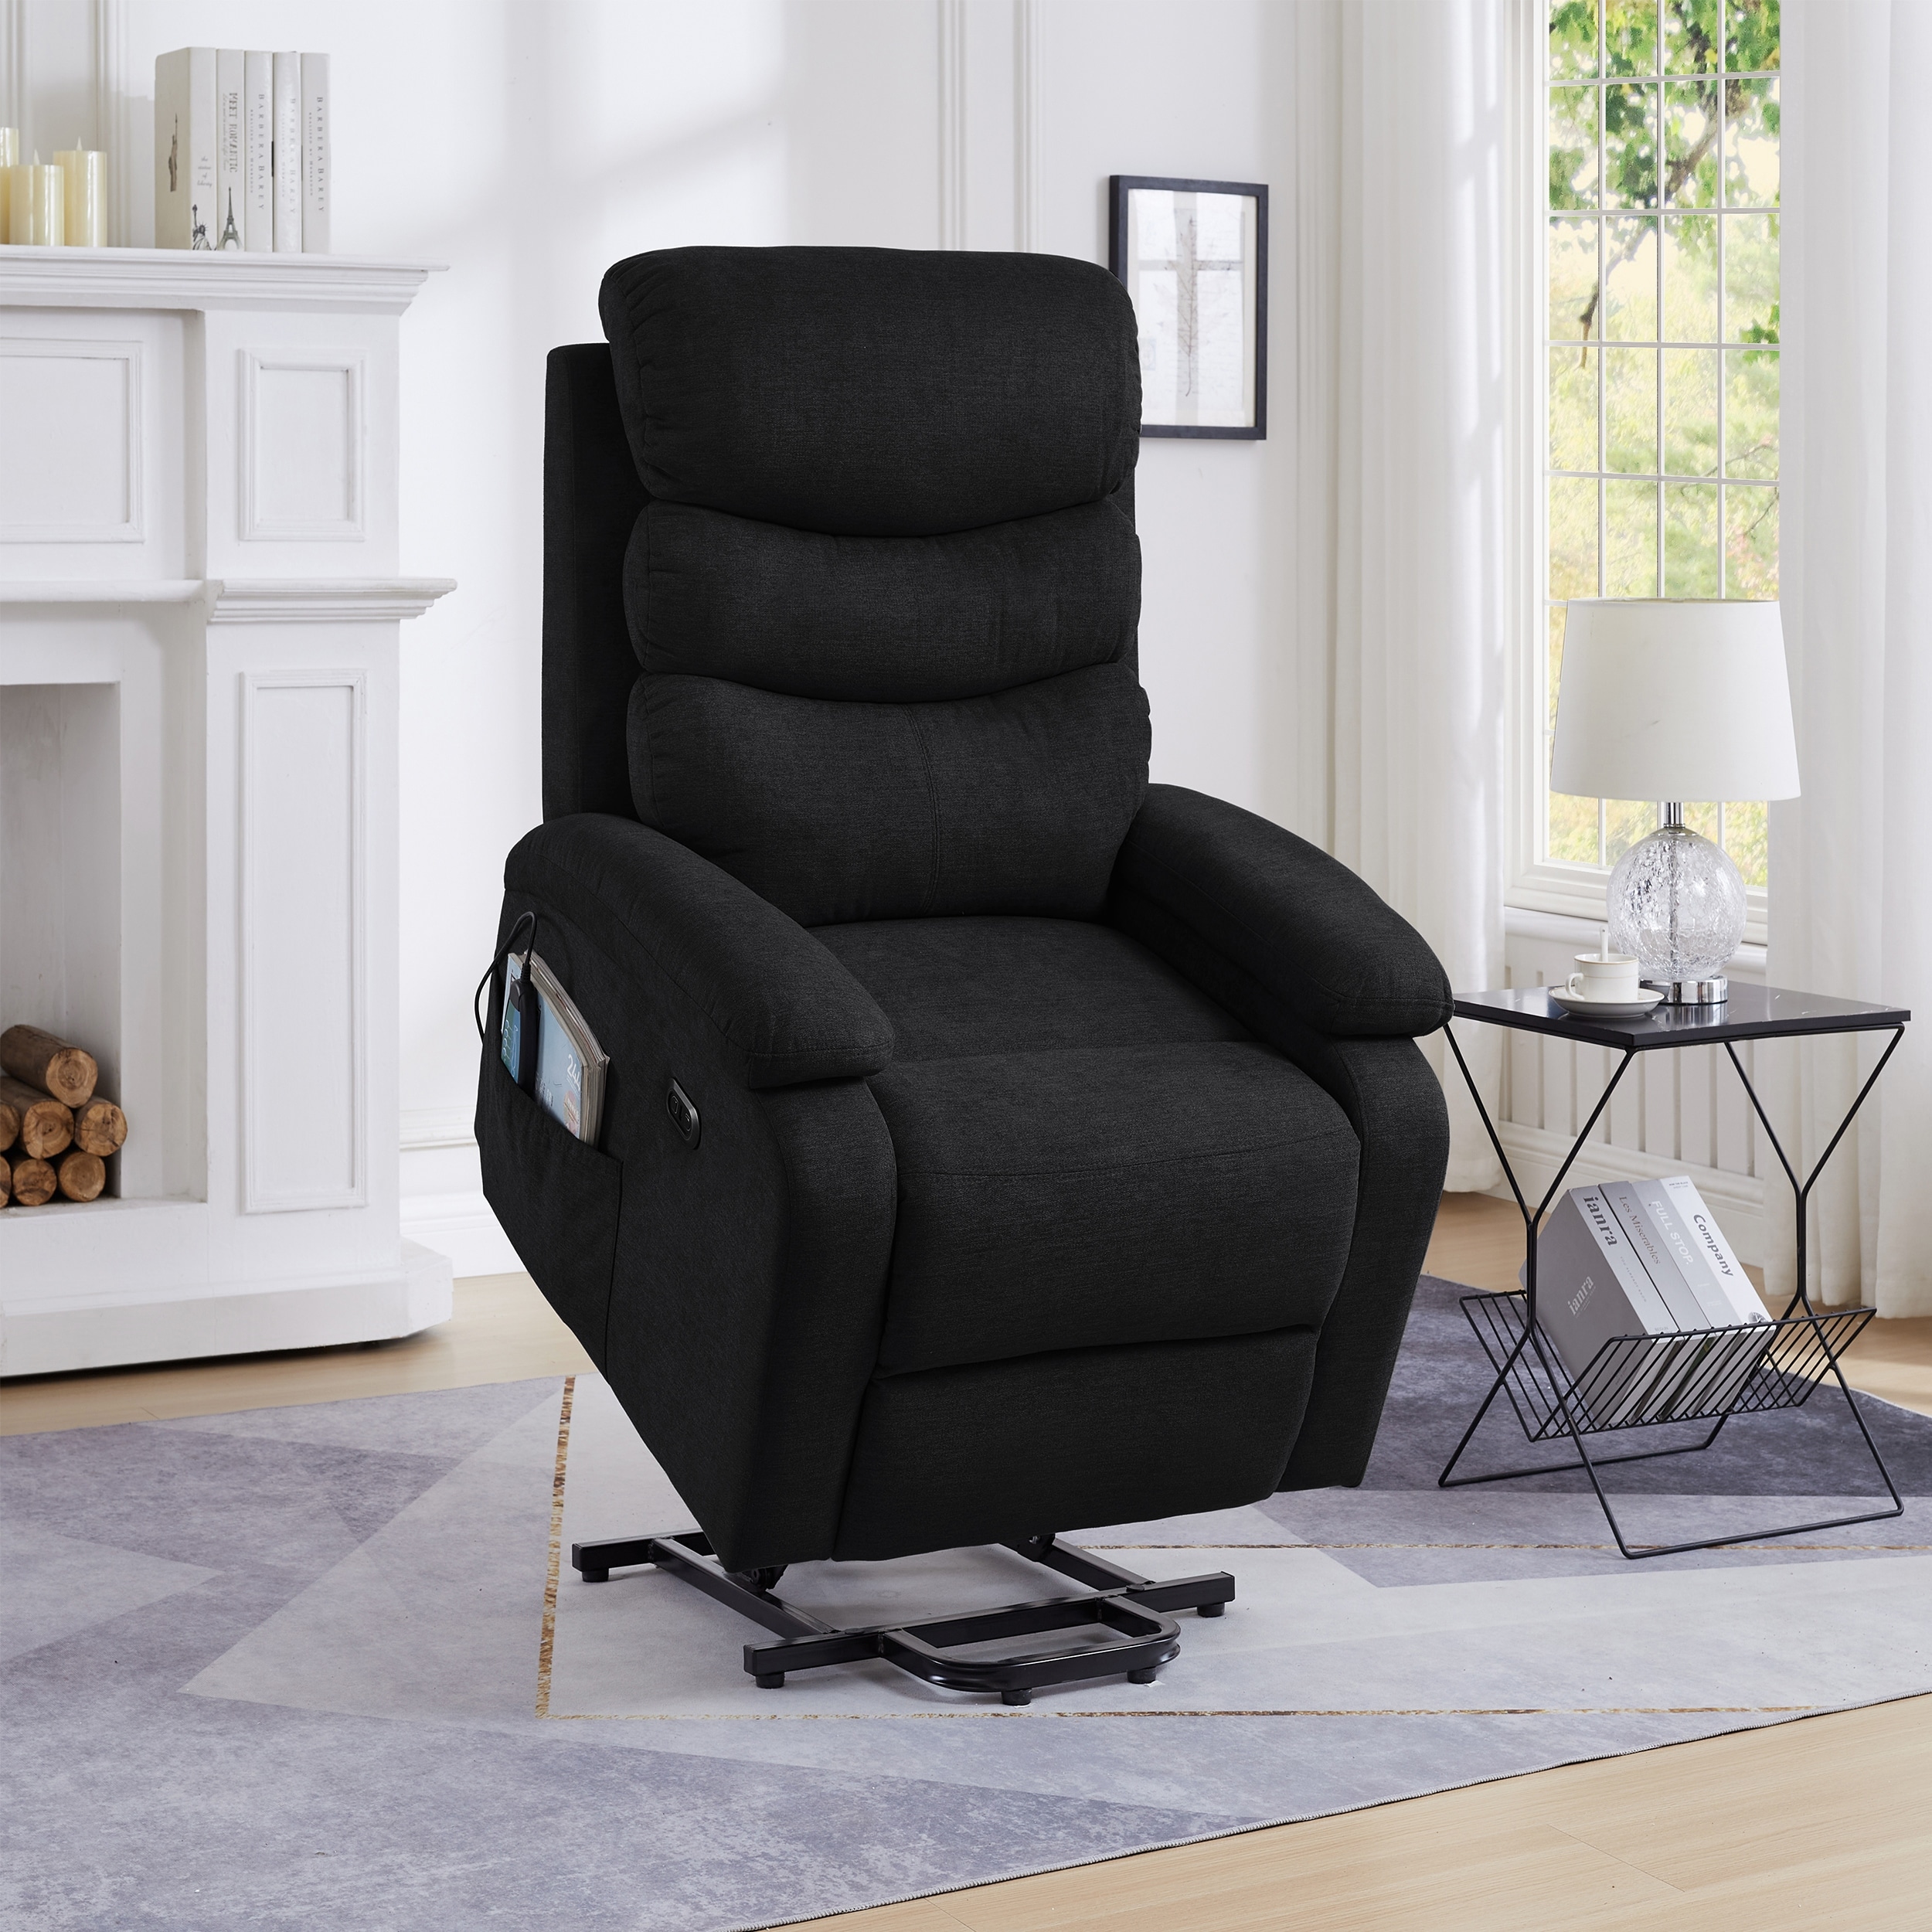 Recliner Seat Gel Cushion for Lazy Boy Style and Lift Chairs